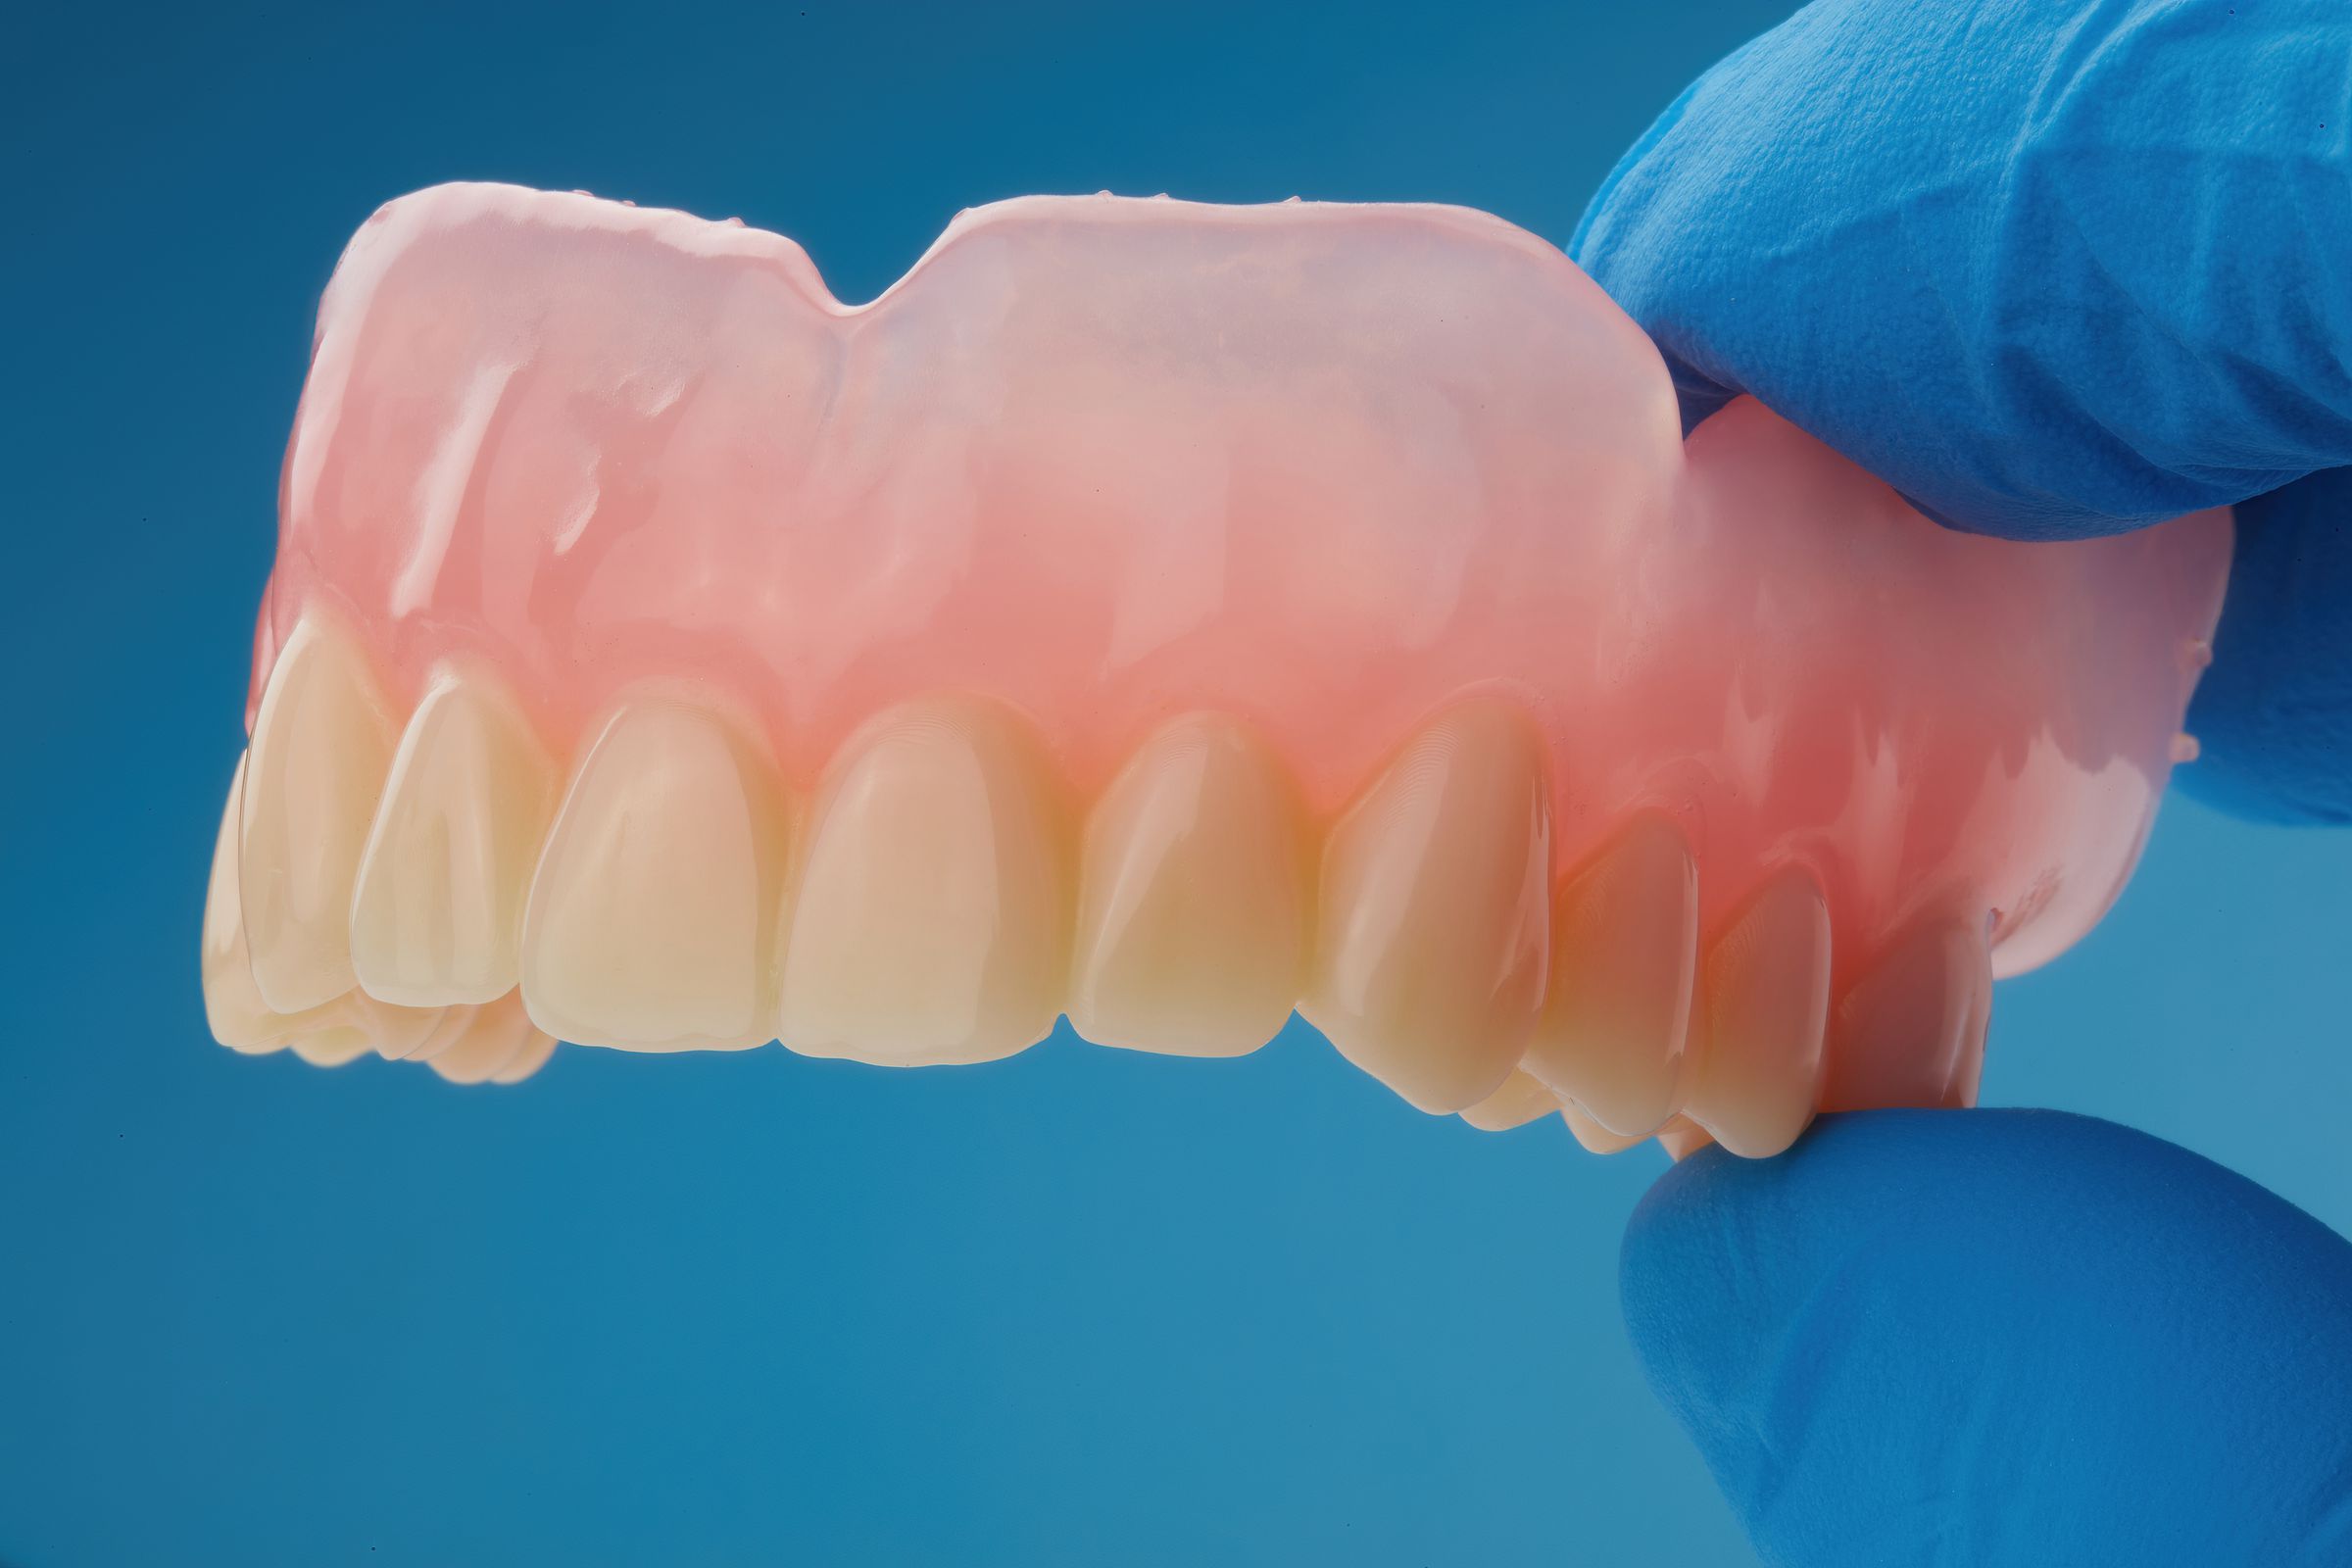 Dentures made with Formlabs’ premium resin.